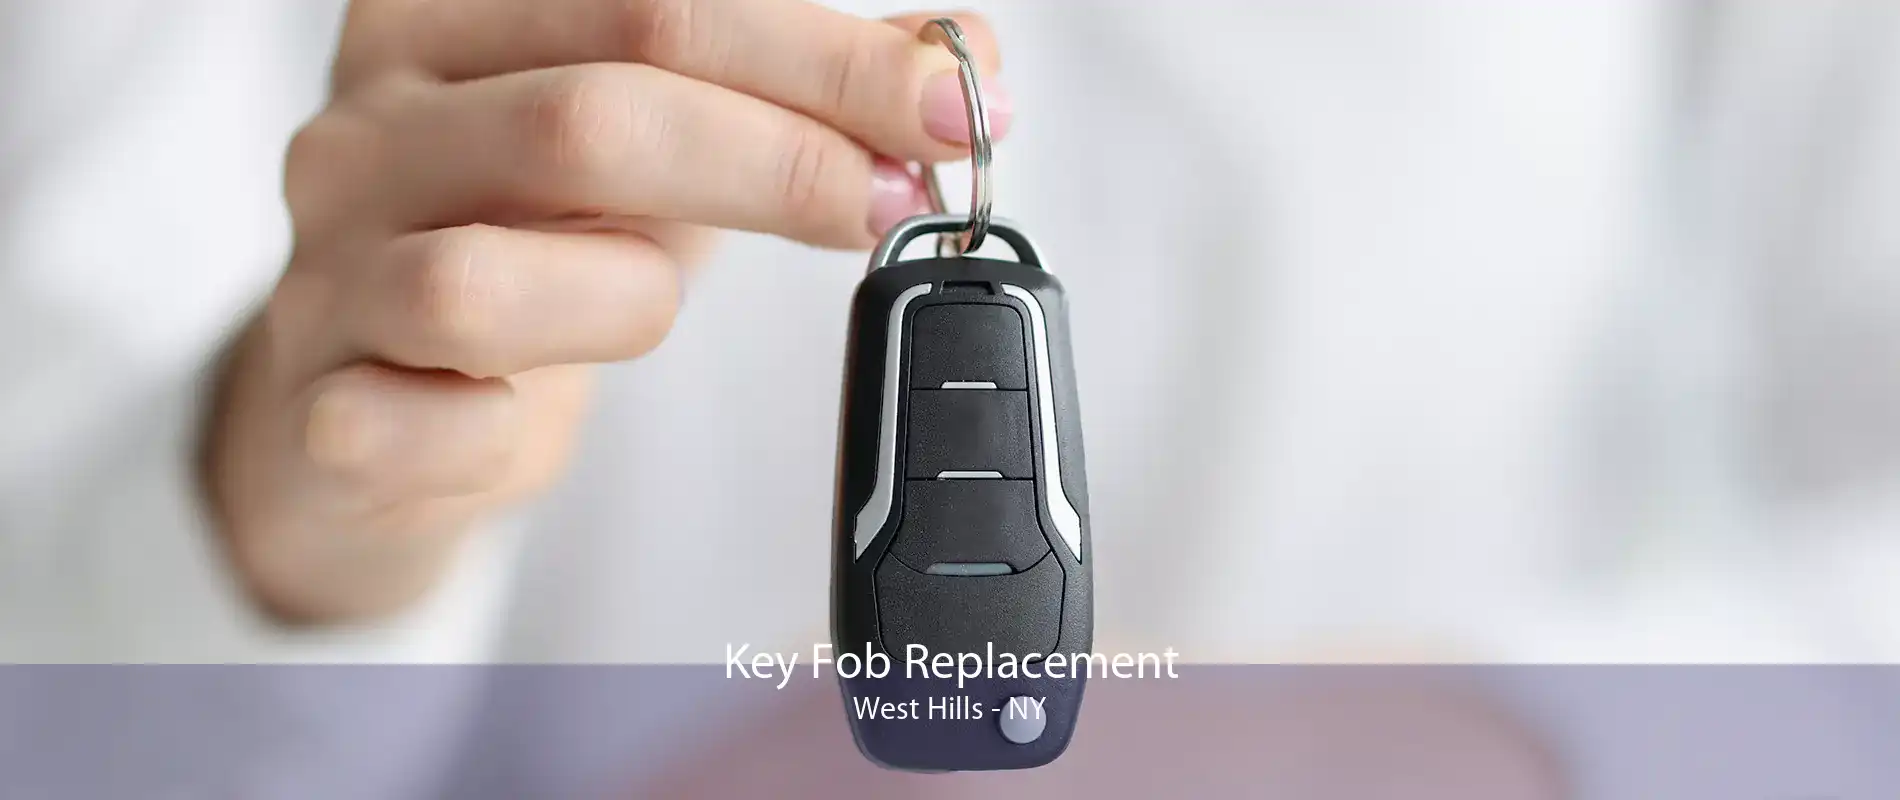 Key Fob Replacement West Hills - NY